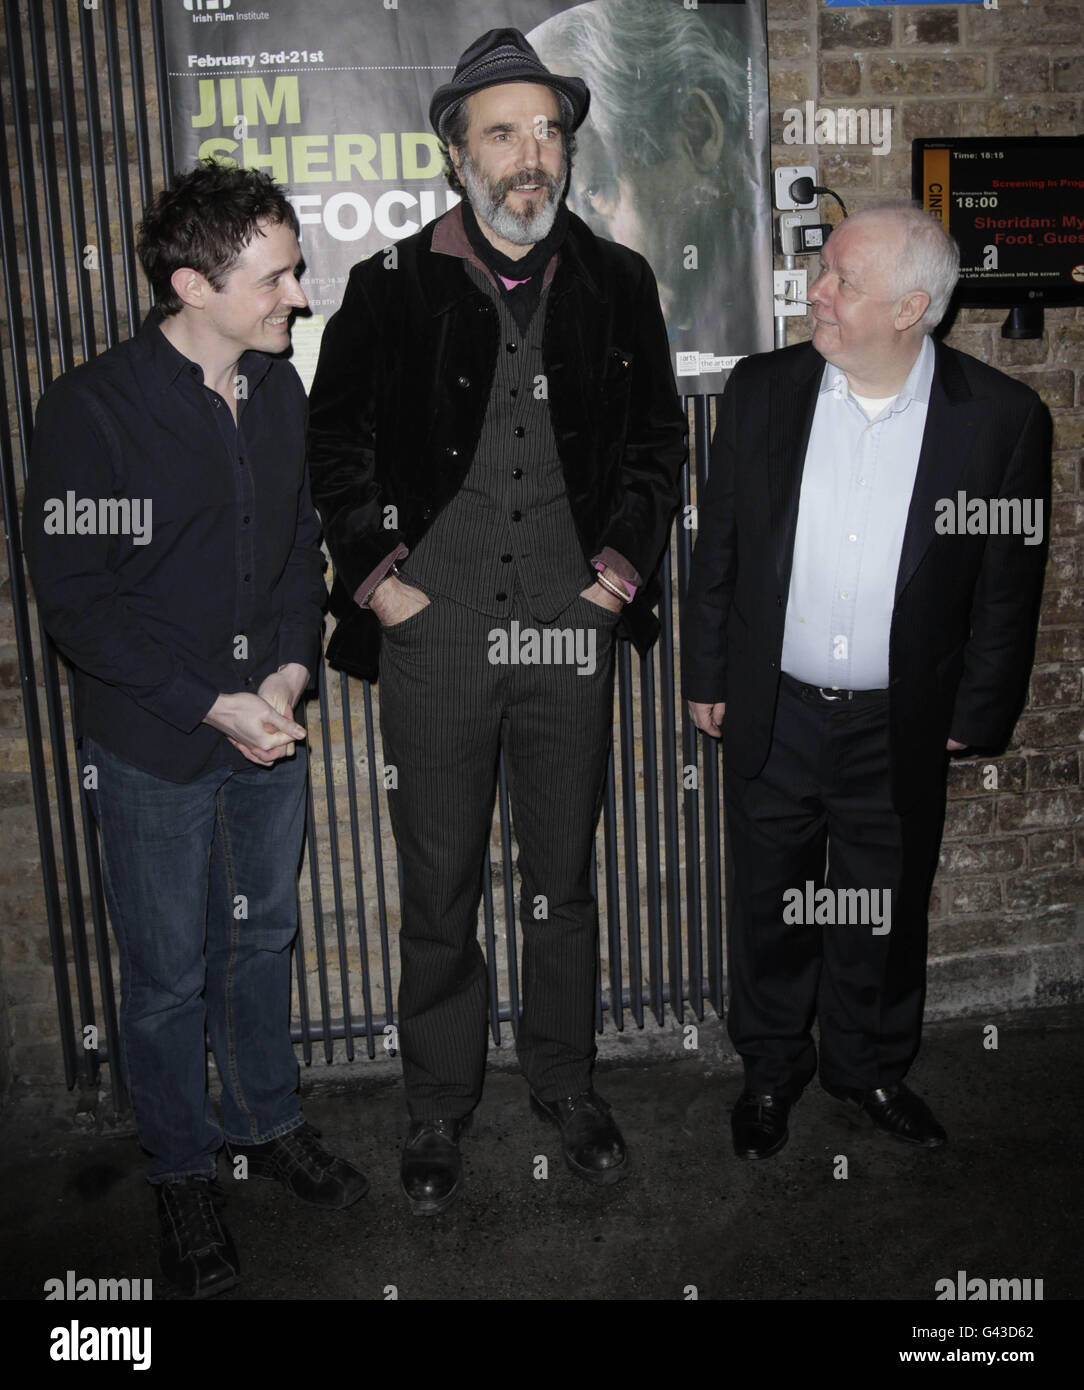 (left to right) Actors Hugh O'Connor and Daniel Day-Lewis and Director Jim Sheridan arrive at the IFI cinema in Dublin for a gala screening of My Left Foot, the opening film of the IFI's Jim Sheridan season. Stock Photo